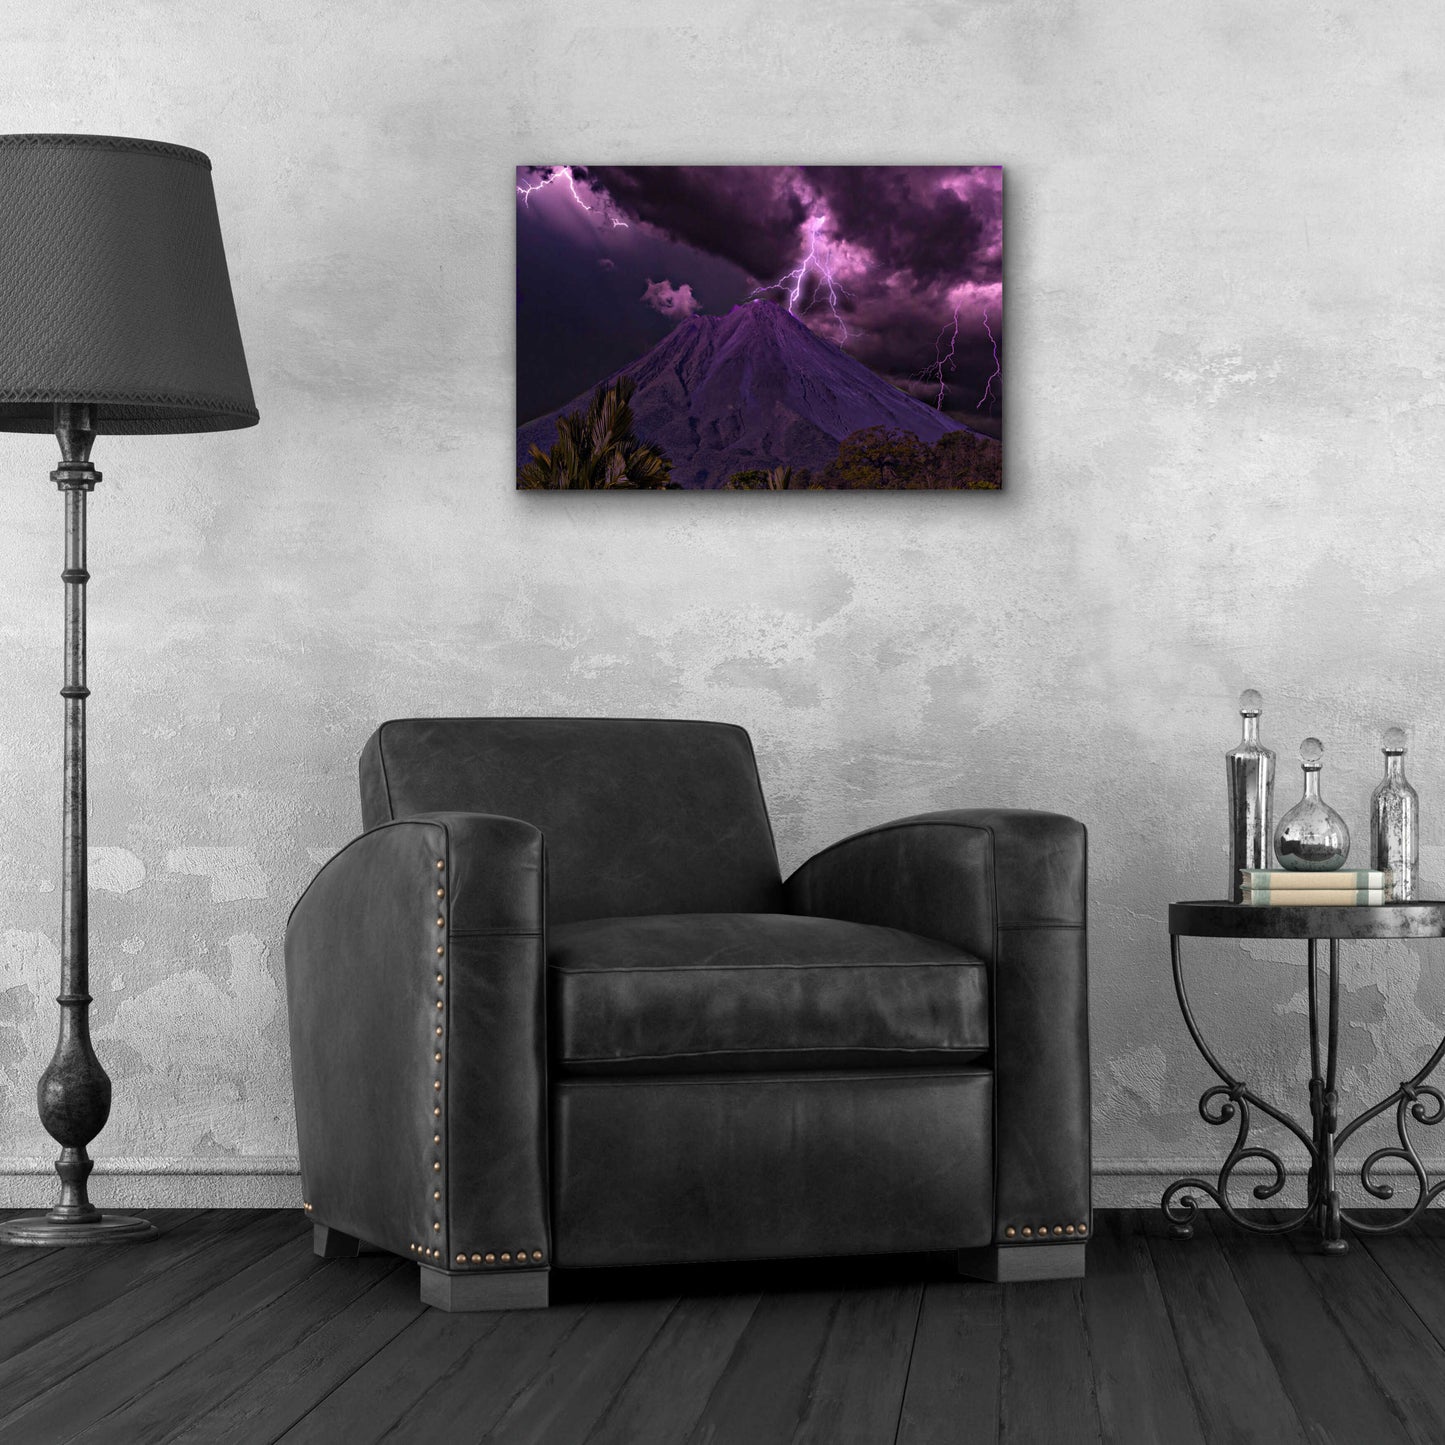 Epic Art 'Lilac Volcano' by Unknown Artist, Acrylic Glass Wall Art,24x16